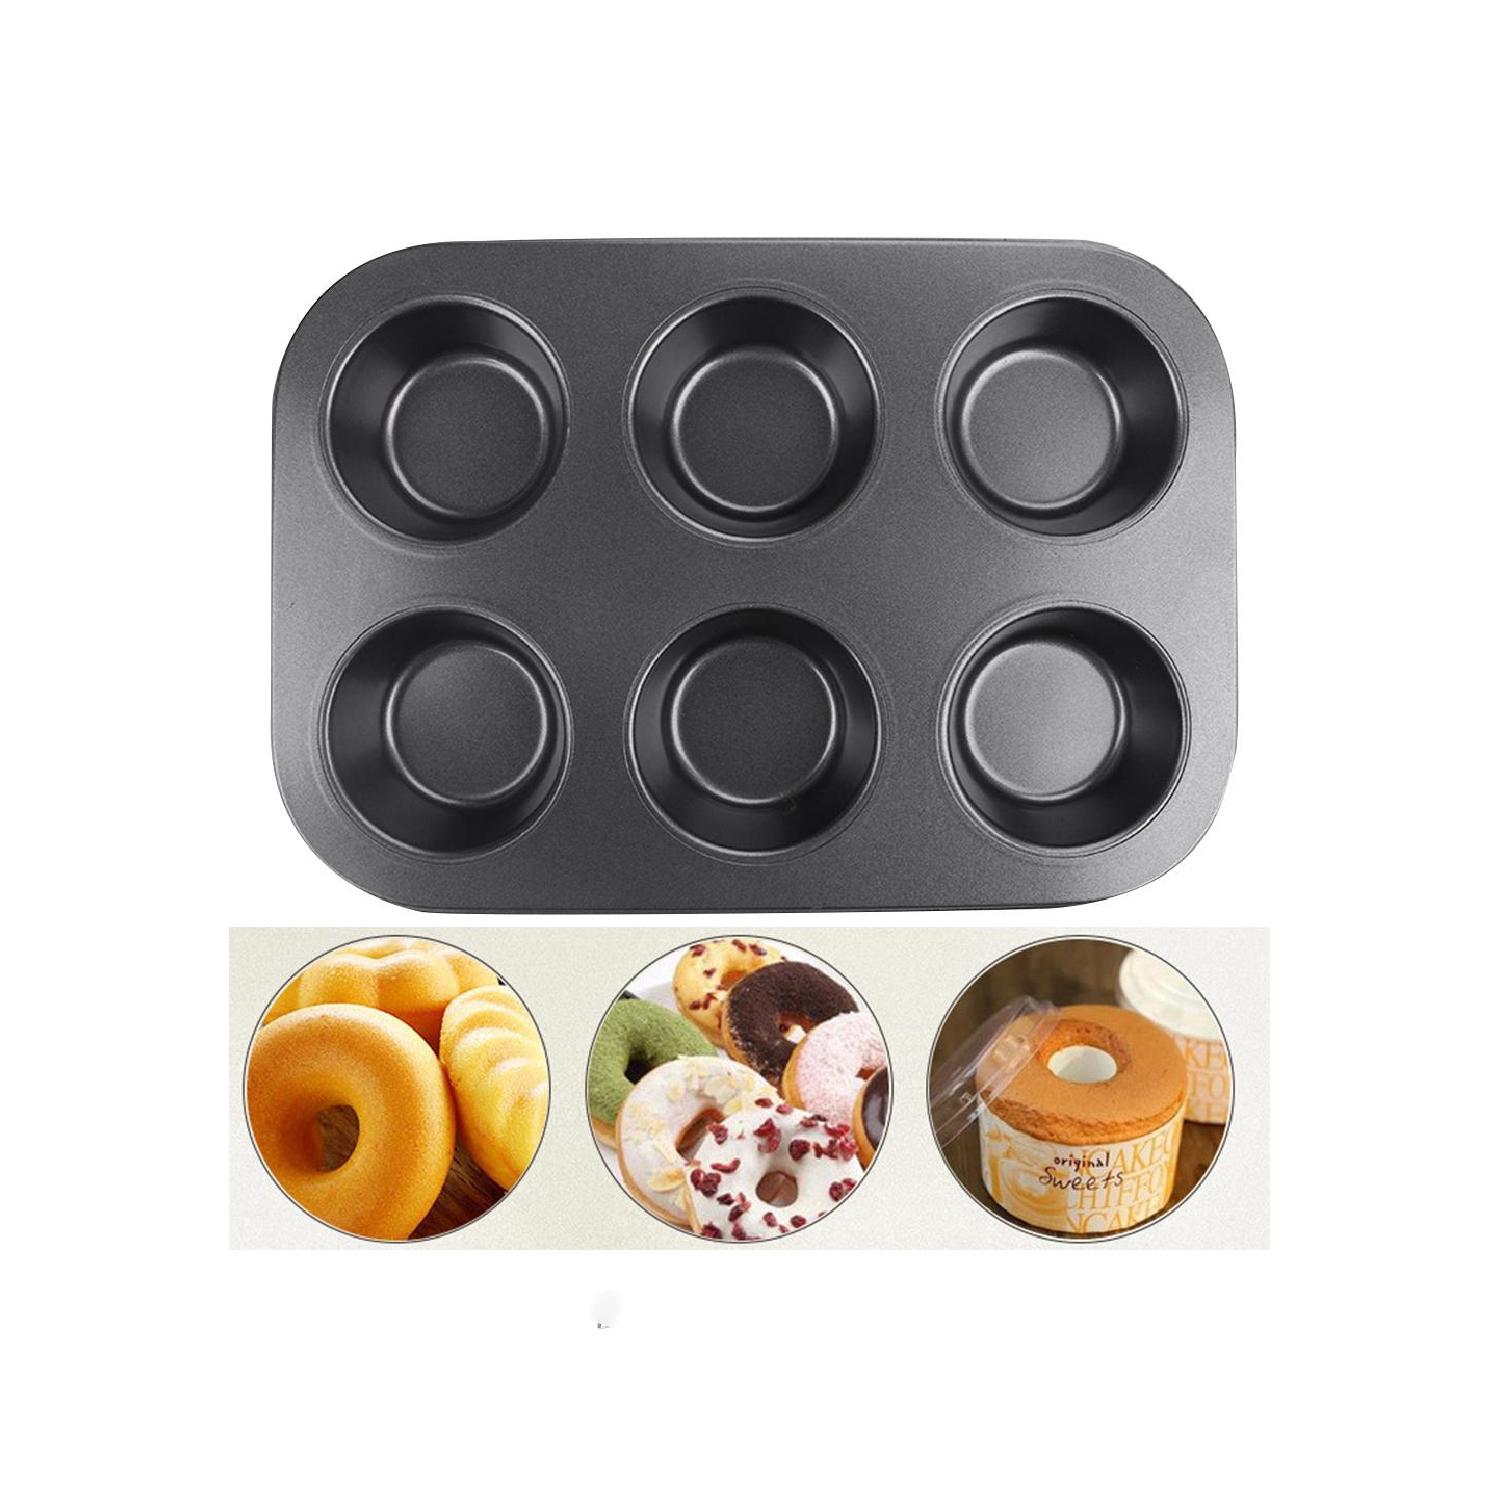 MERRIT CARBON STEEL 6 HOLE MUFFIN PAN